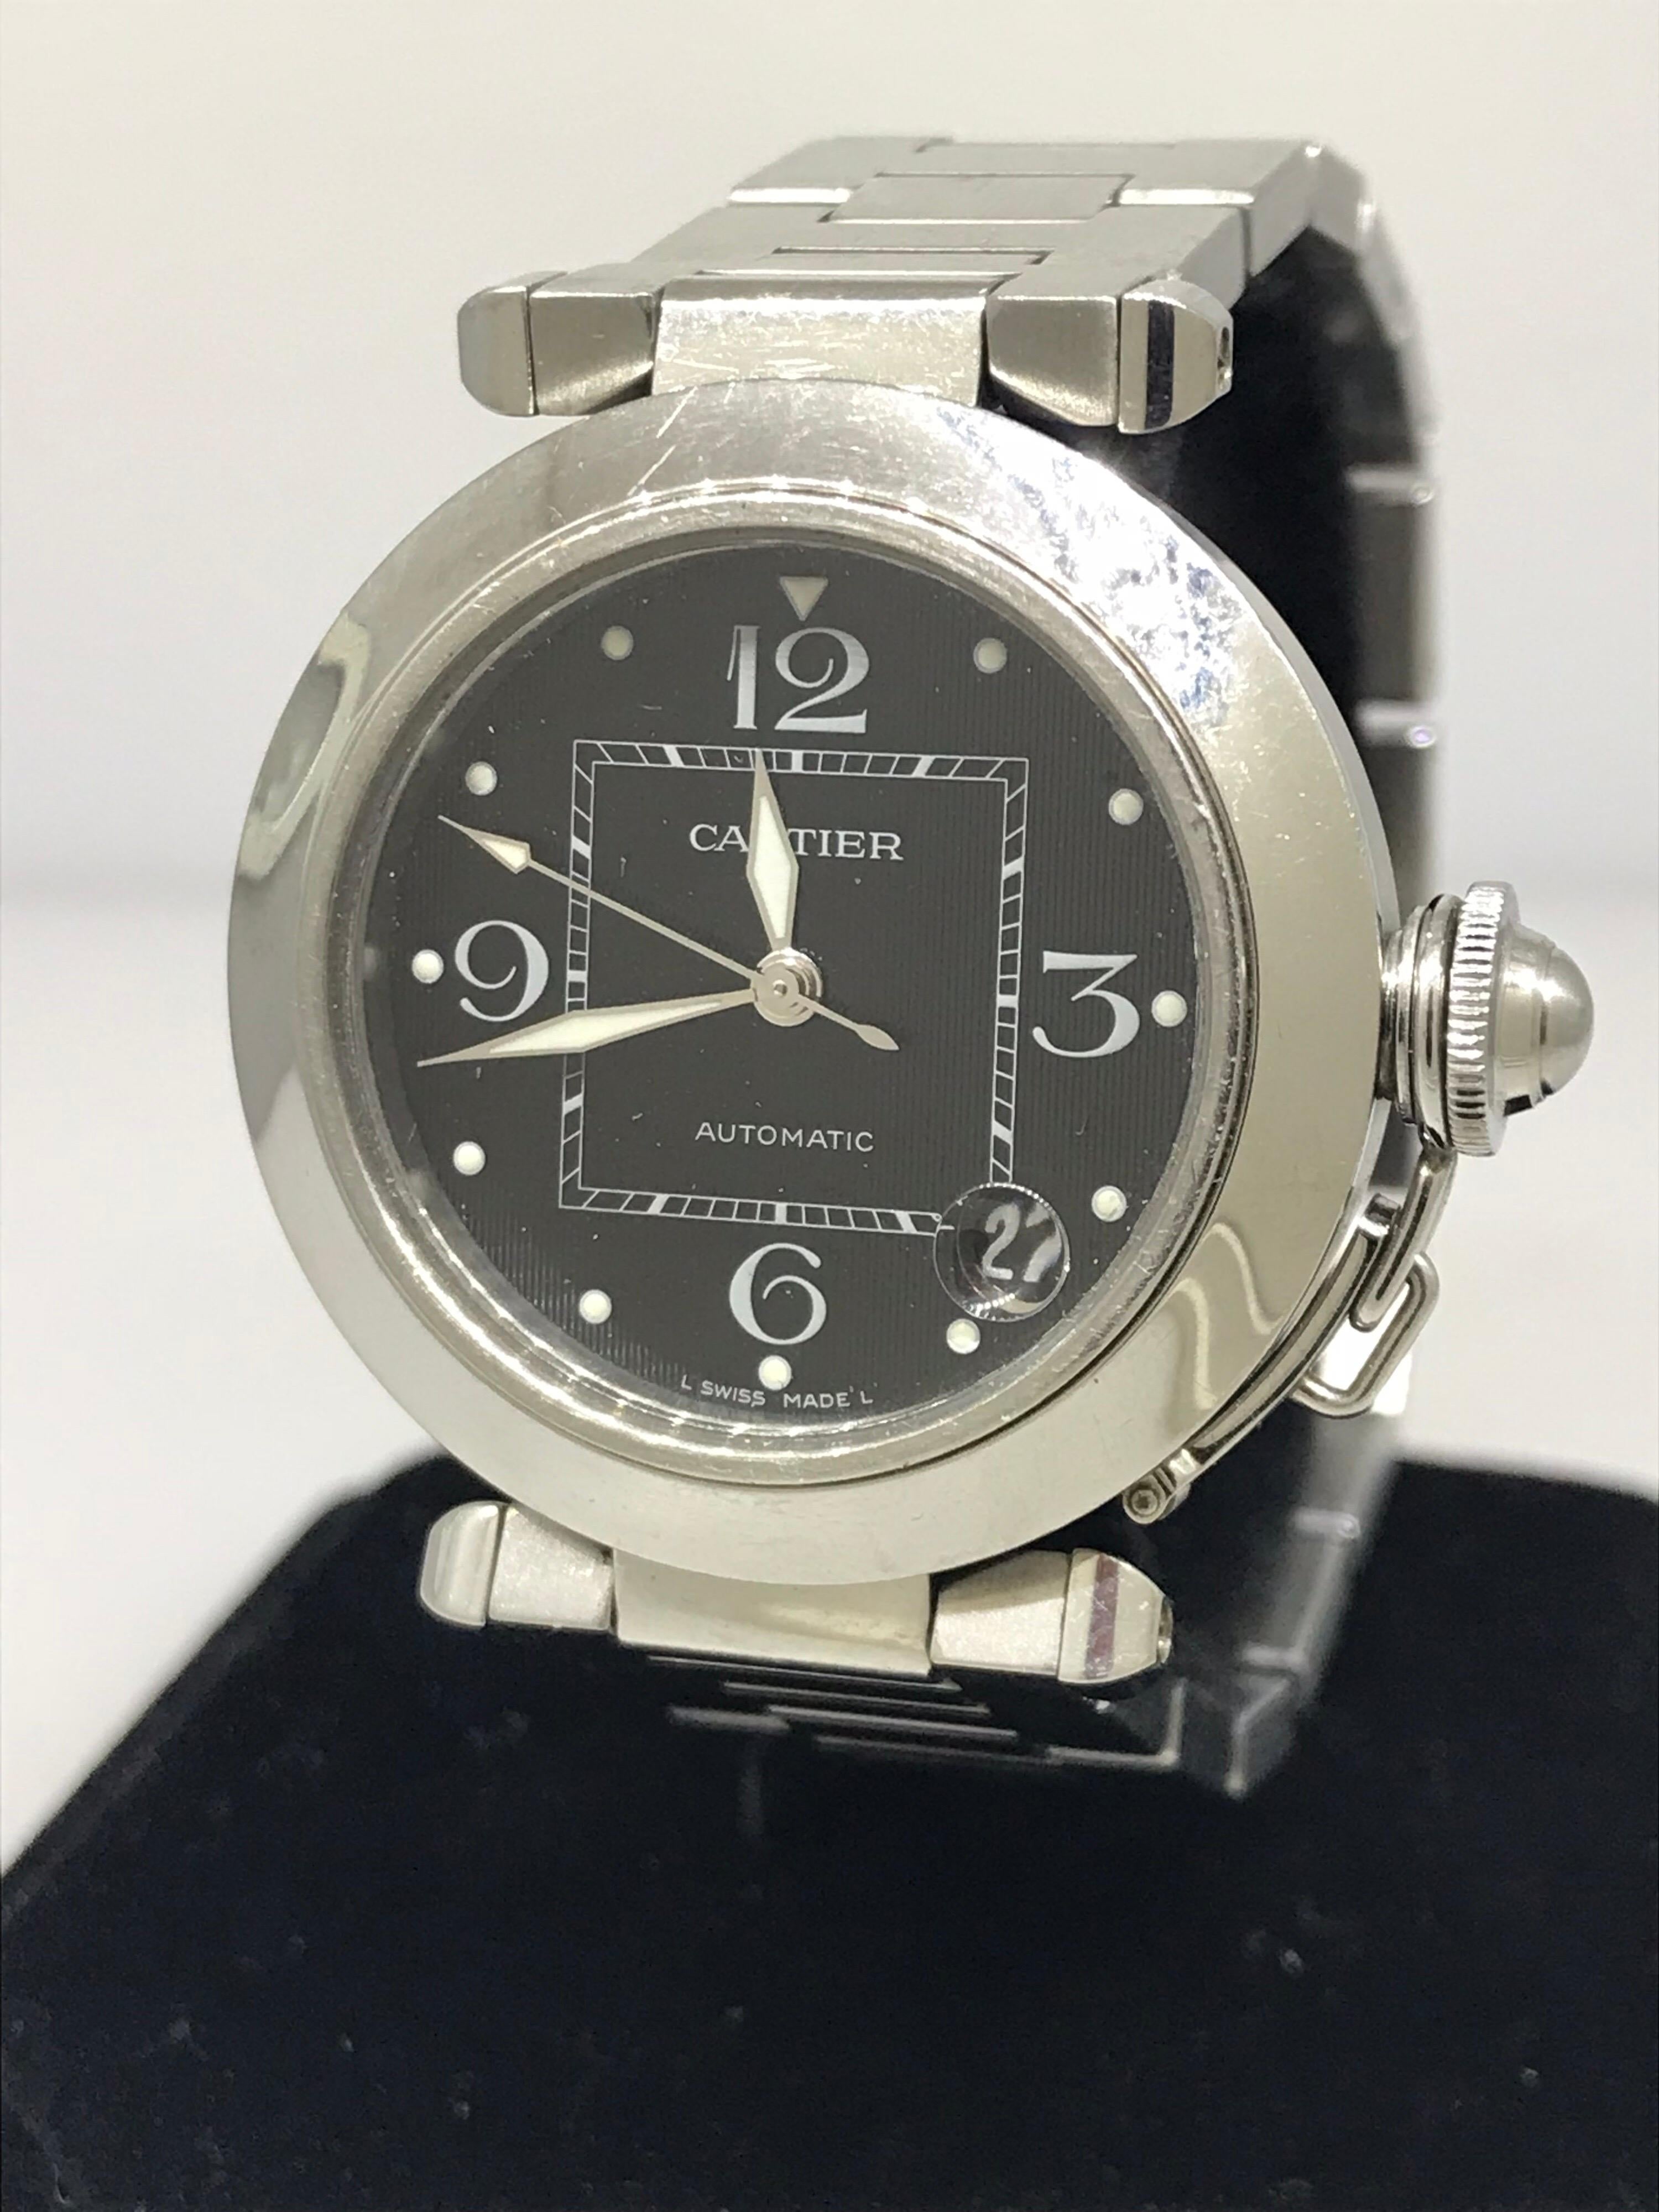 Cartier Pasha C Medium Men's Watch

Model Number: W31053M7

100% Authentic

Pre owned in Very Good condition

Comes with a generic watch box

Stainless Steel Case and Bracelet

Black Dial

Case Diameter: 35mm

Swiss made automatic movement

Display